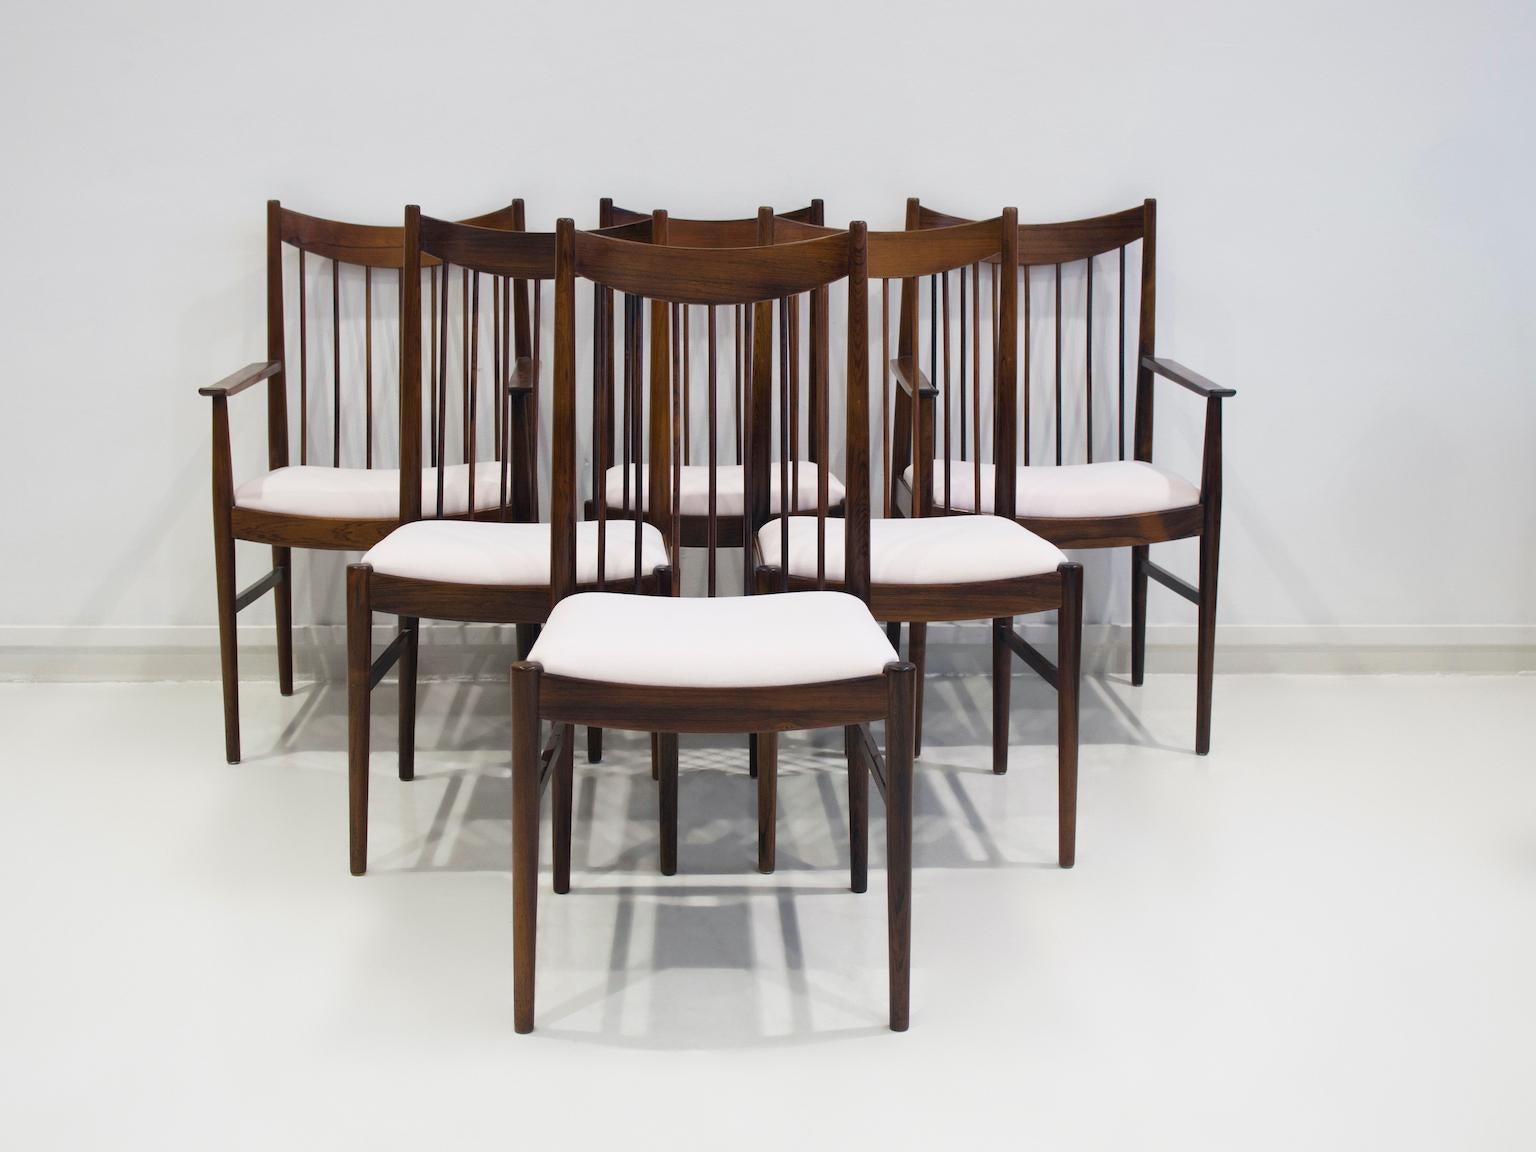 Set of six chairs, model 422, designed by Arne Vodder in the 1960s. Four chairs without arms and two with arms. Frame in solid hardwood, seats reupholstered in very light pink furniture fabric, 63% CO and 37% LI. Produced by Sibast Furniture.